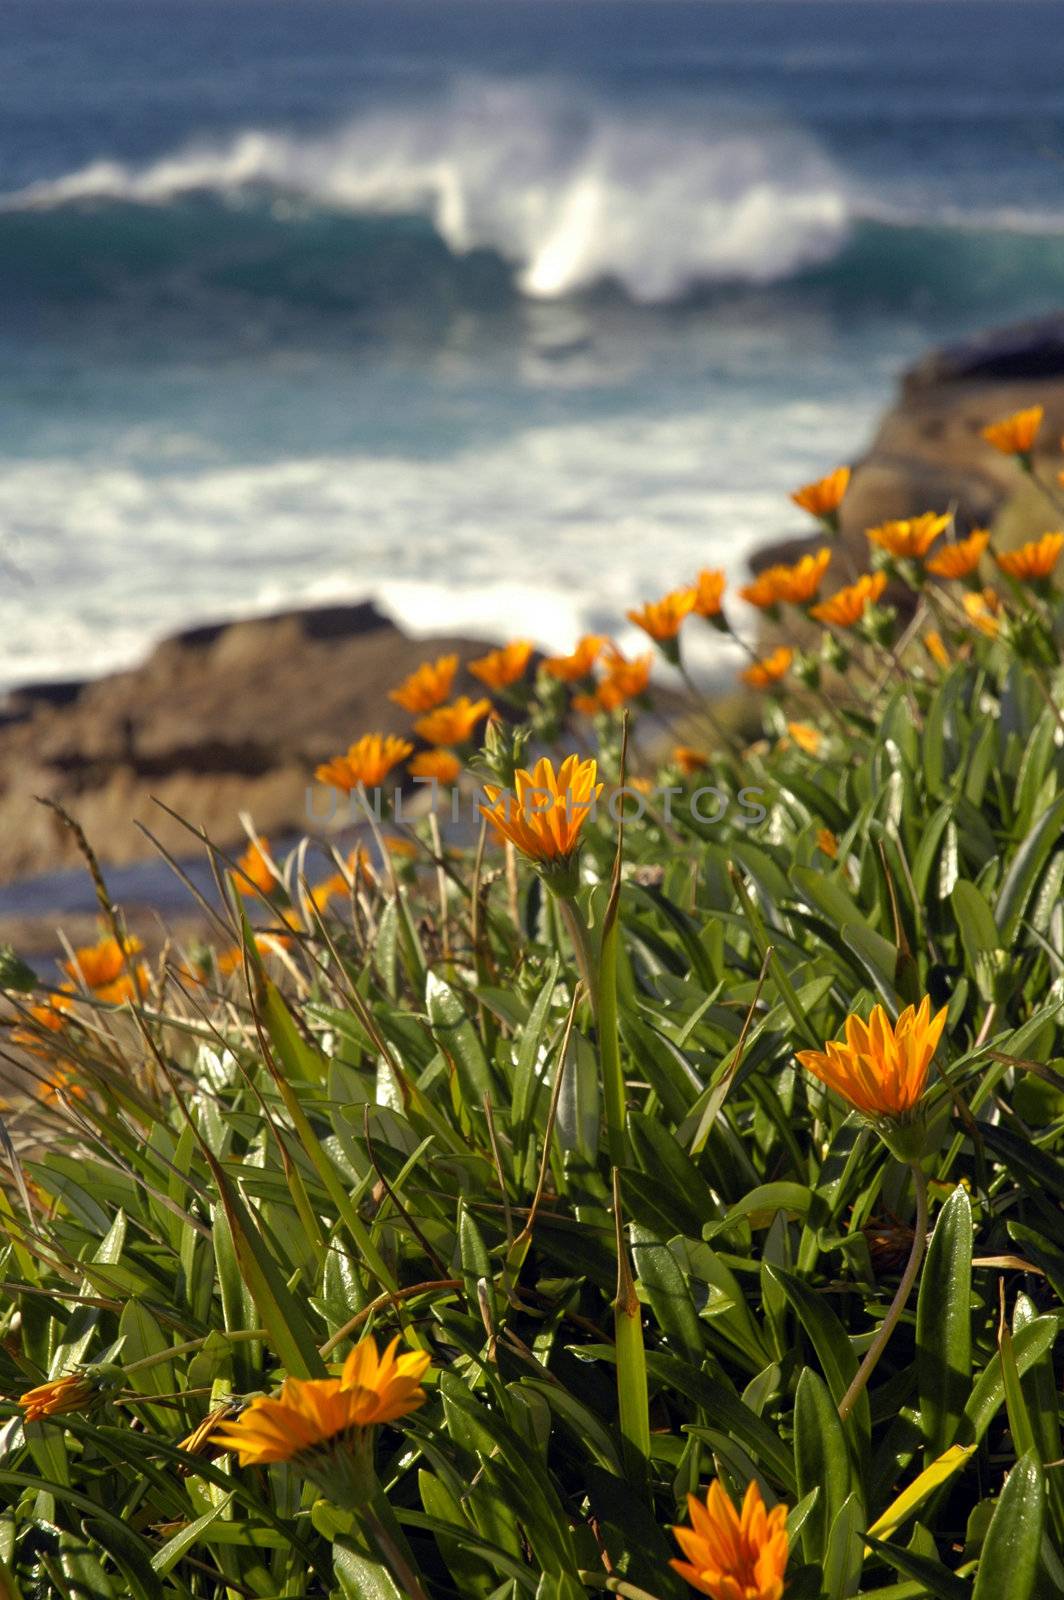 nature scenery, orange flowers in front of brown rocks, water behind edge cliff, blurred white wave coming closer